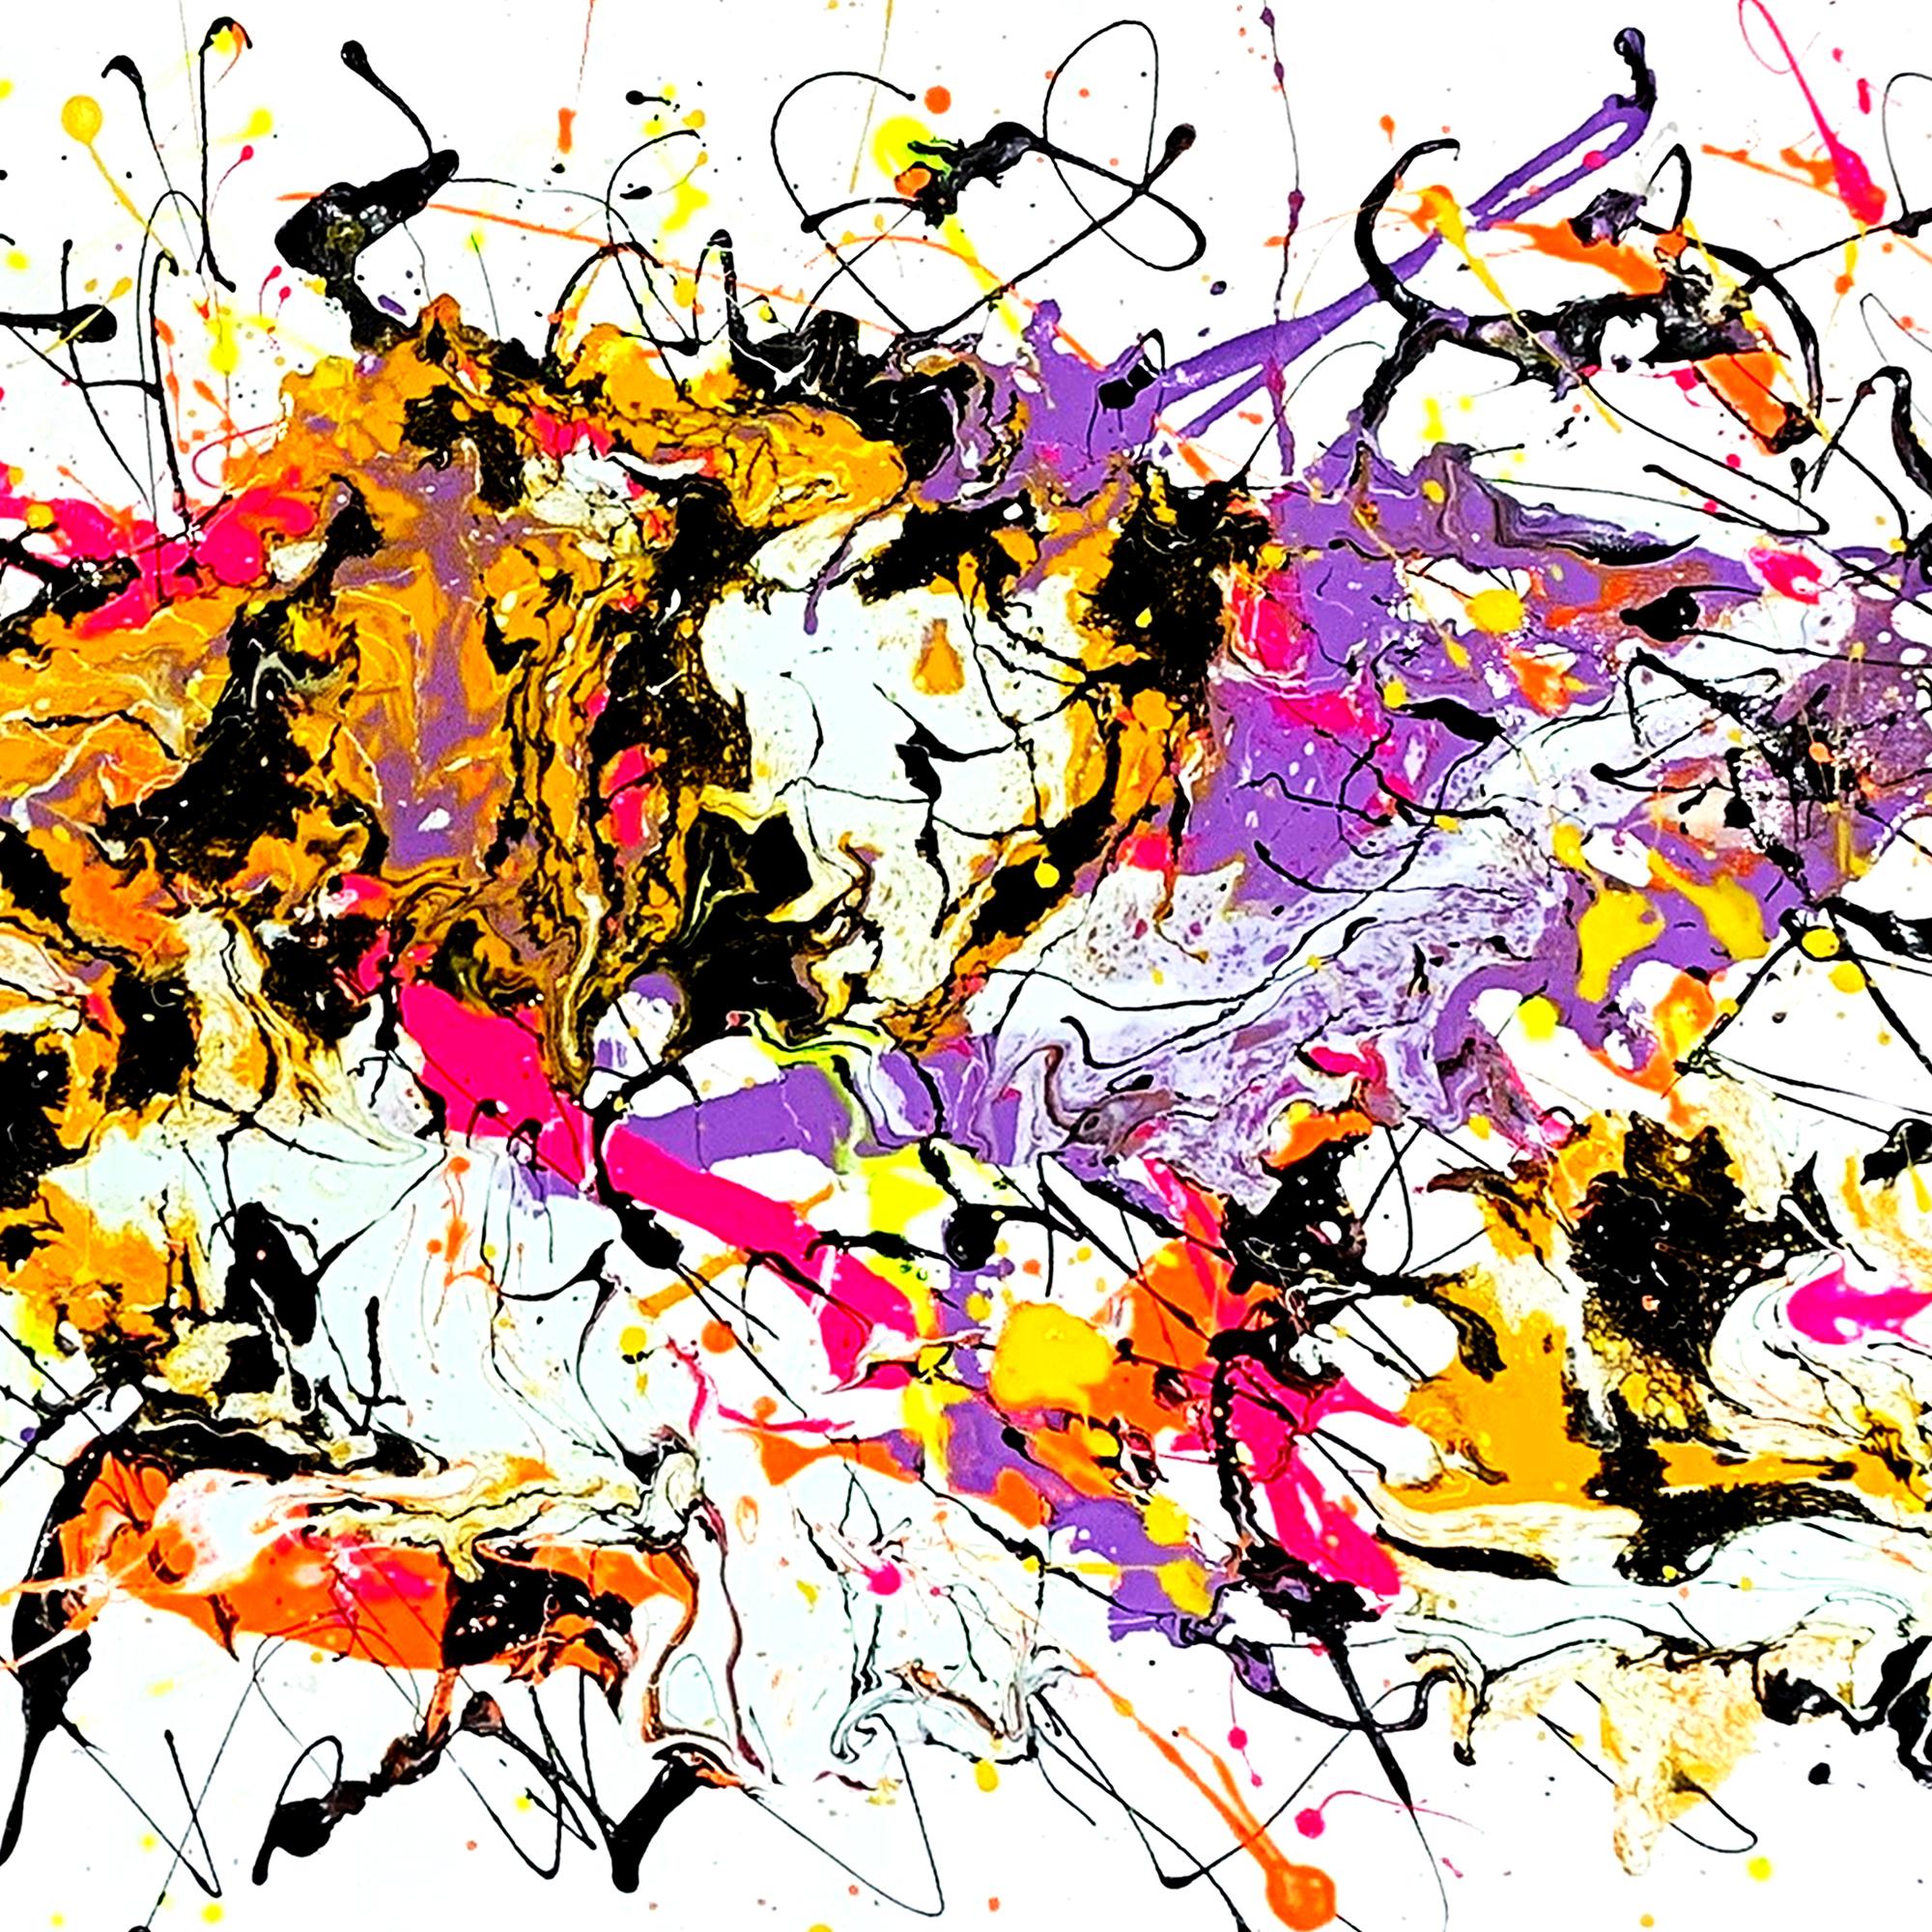 Freestyle Colourscape by Estelle Asmodelle - This artwork is really action painting that expresses freedom in a freestyle manner. Painted in the style of abstract expressionism.

This work is painted on professional-grade canvas and has been sealed